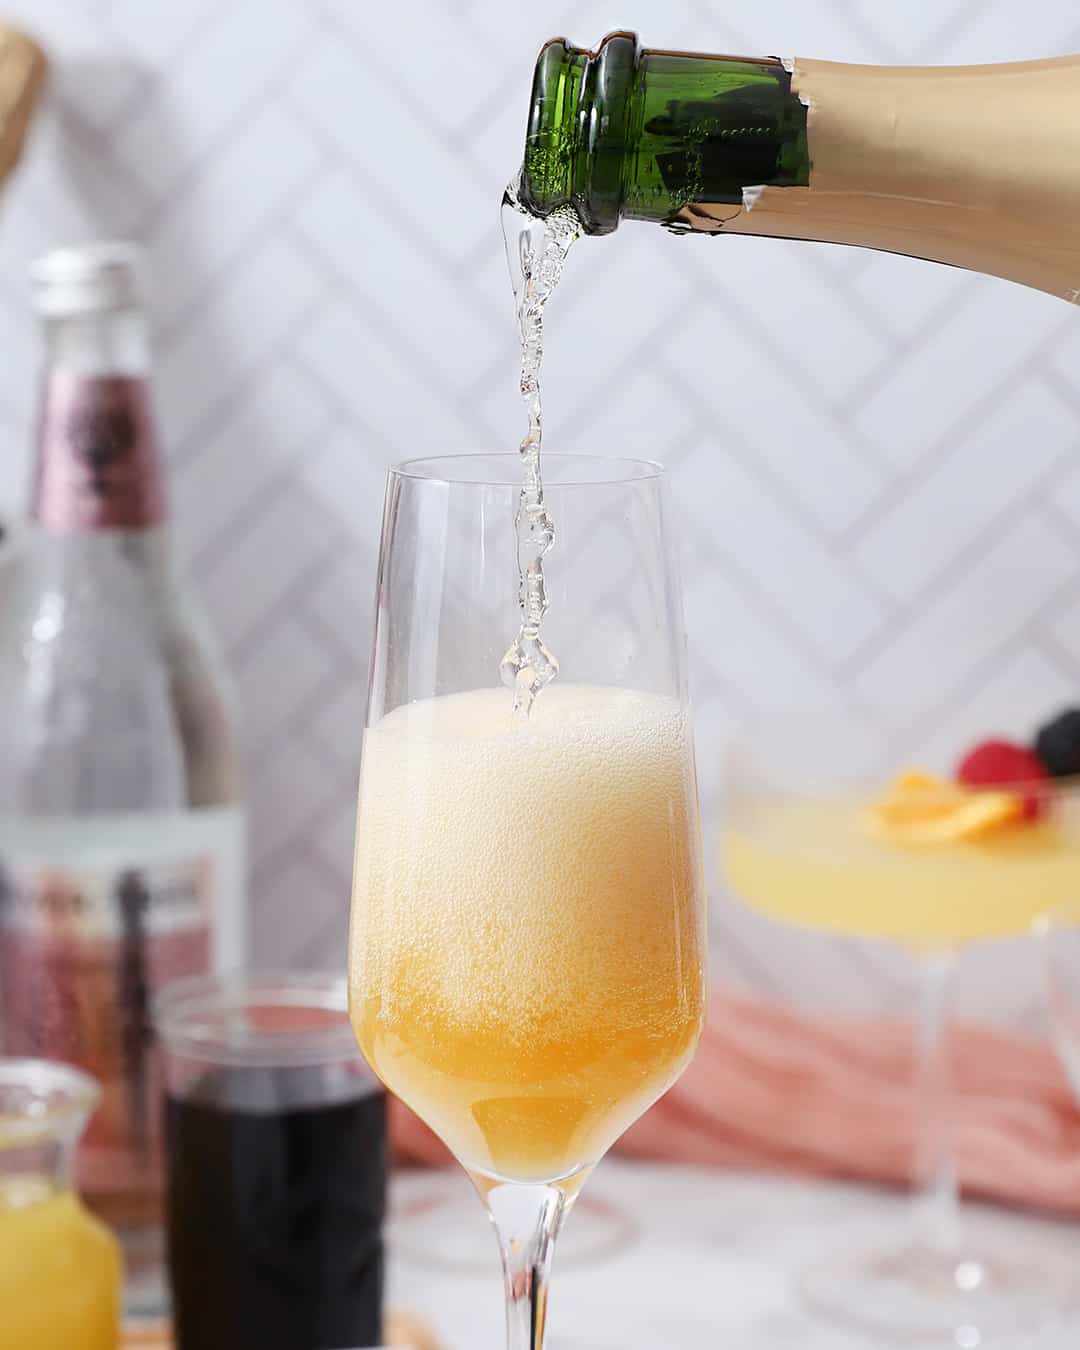 Champagne being poured into a glass with juice.